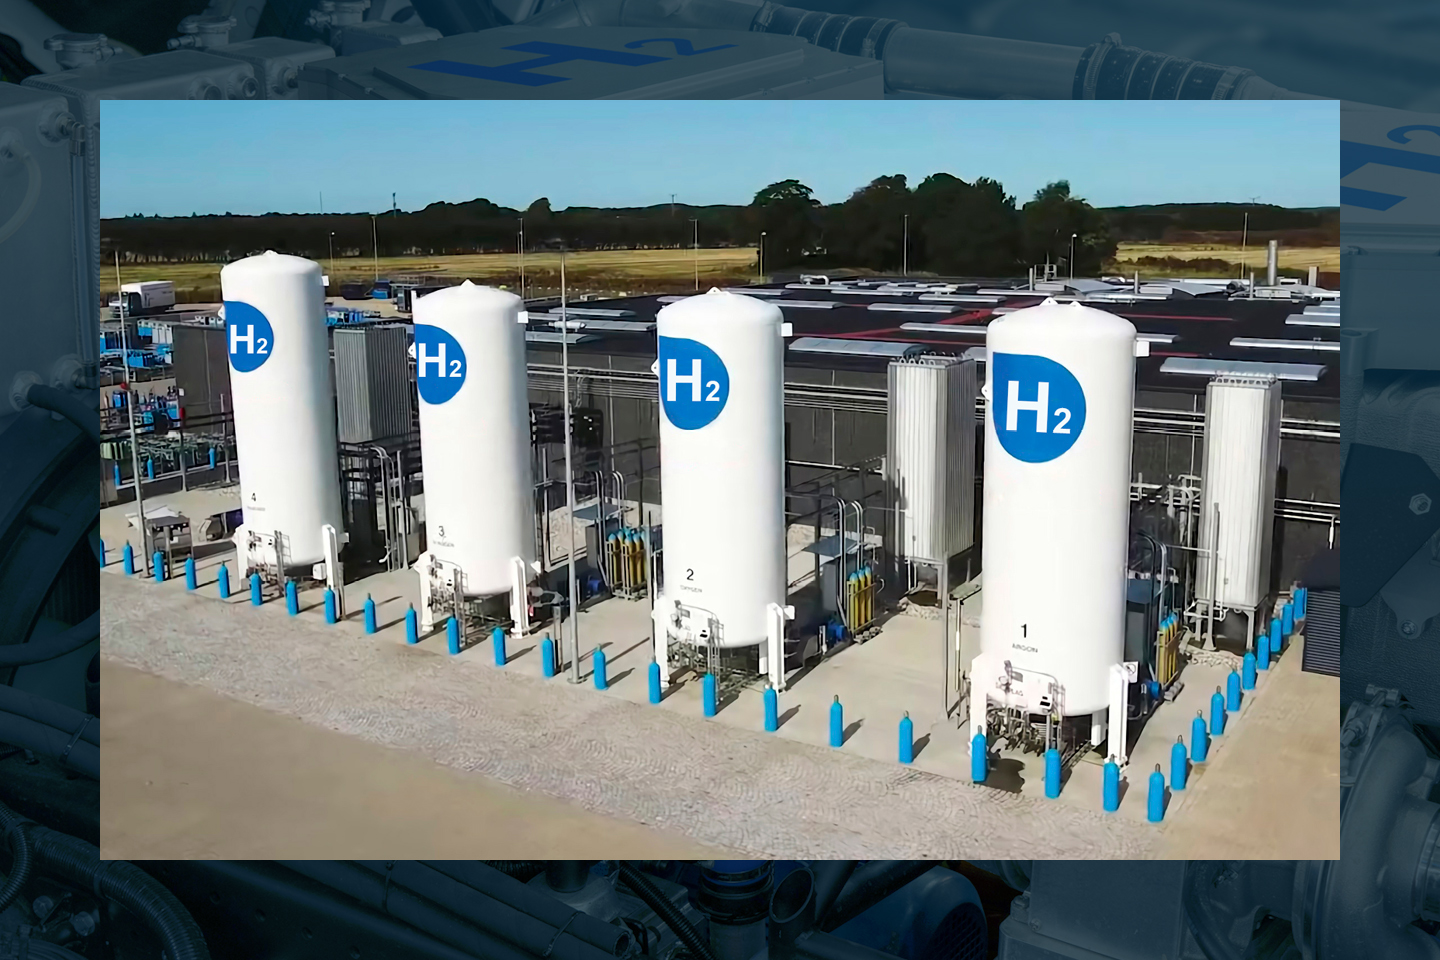 Aerial view of four tanks with blue hydrogen signs on the outside